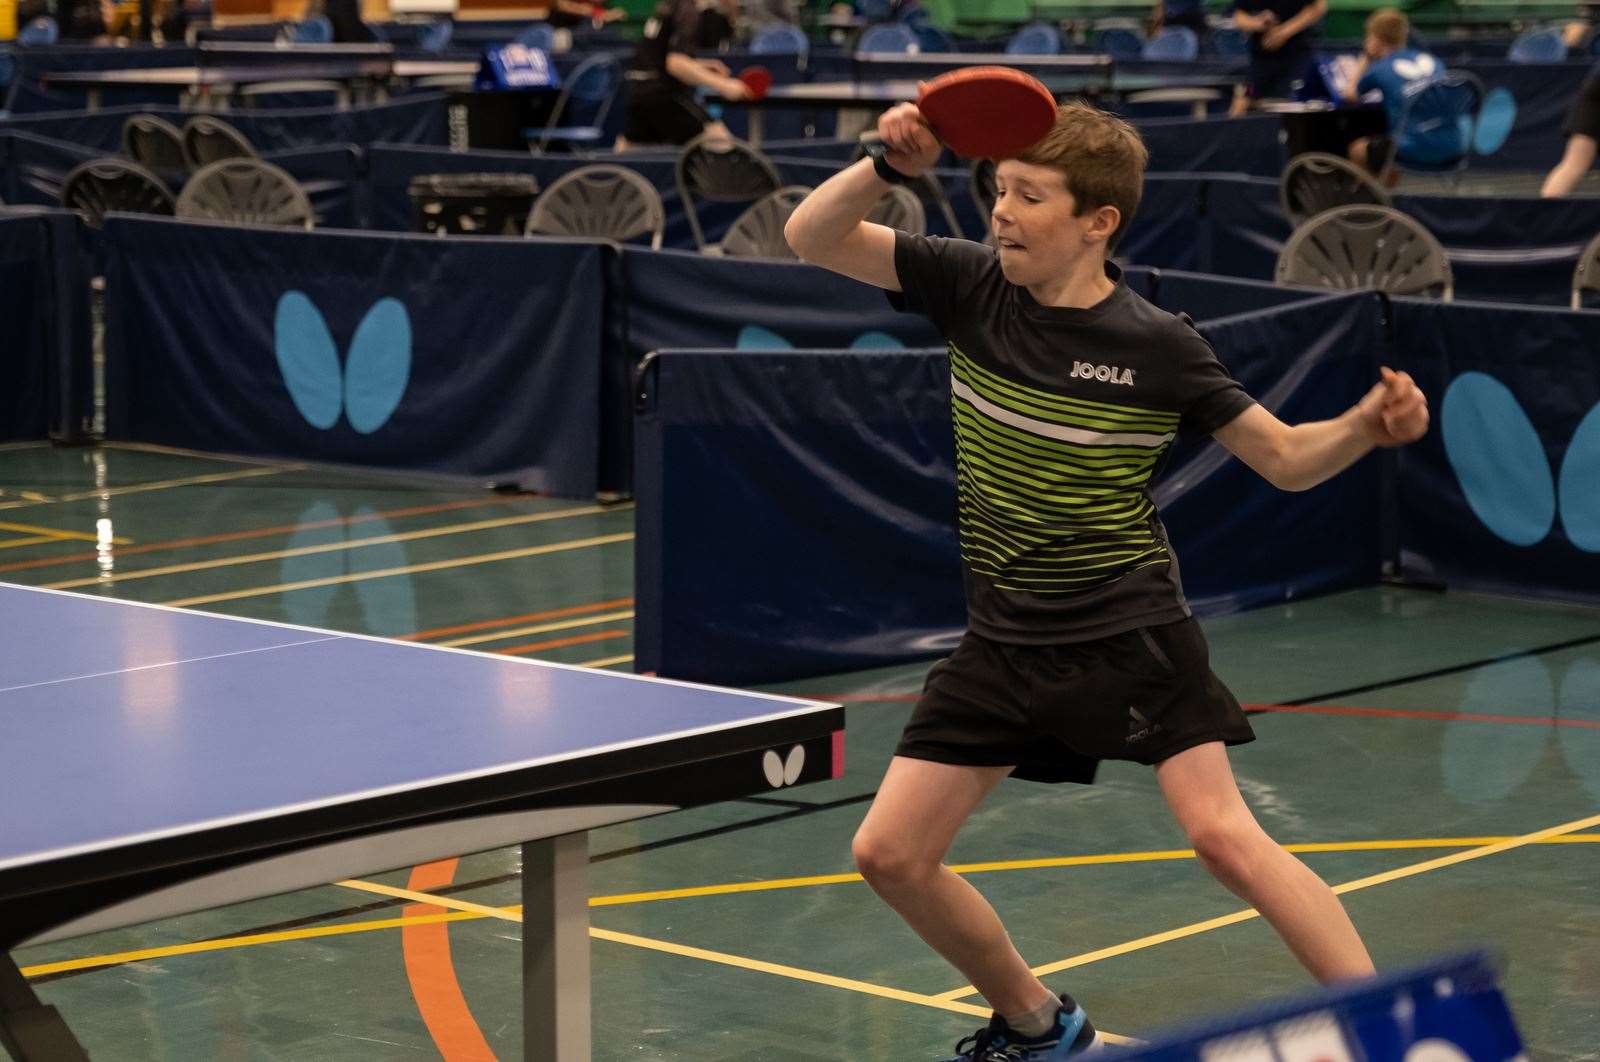 Alexander Stepney in action at the Perth Open. Photo: Tony Carroll